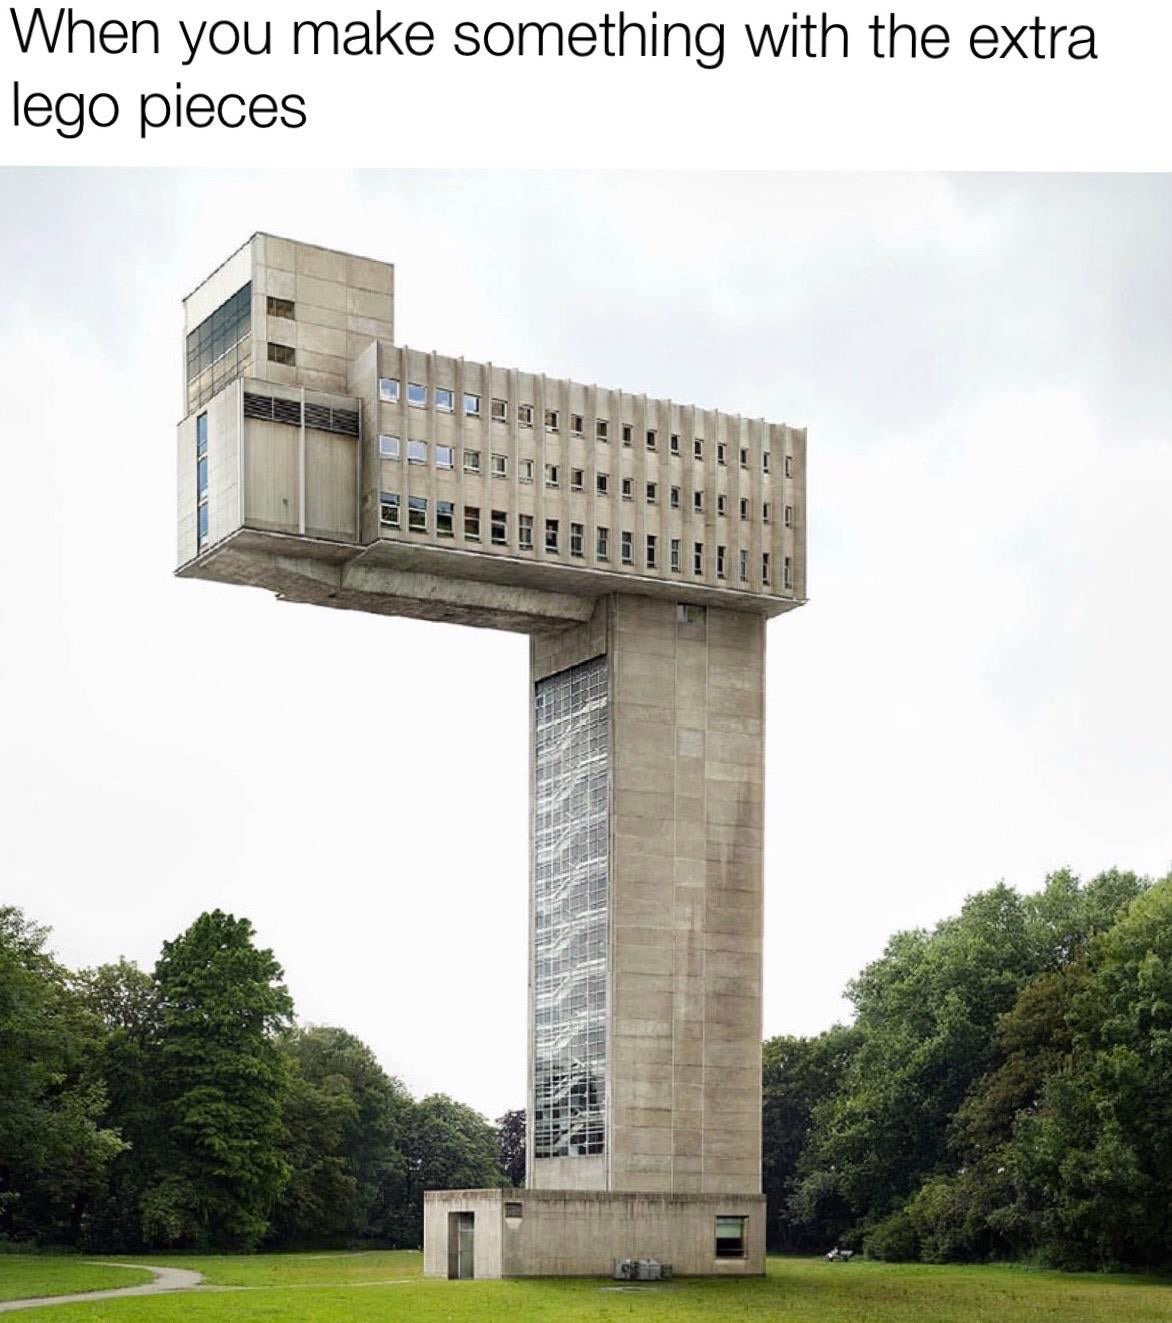 filip dujardin - When you make something with the extra lego pieces 1